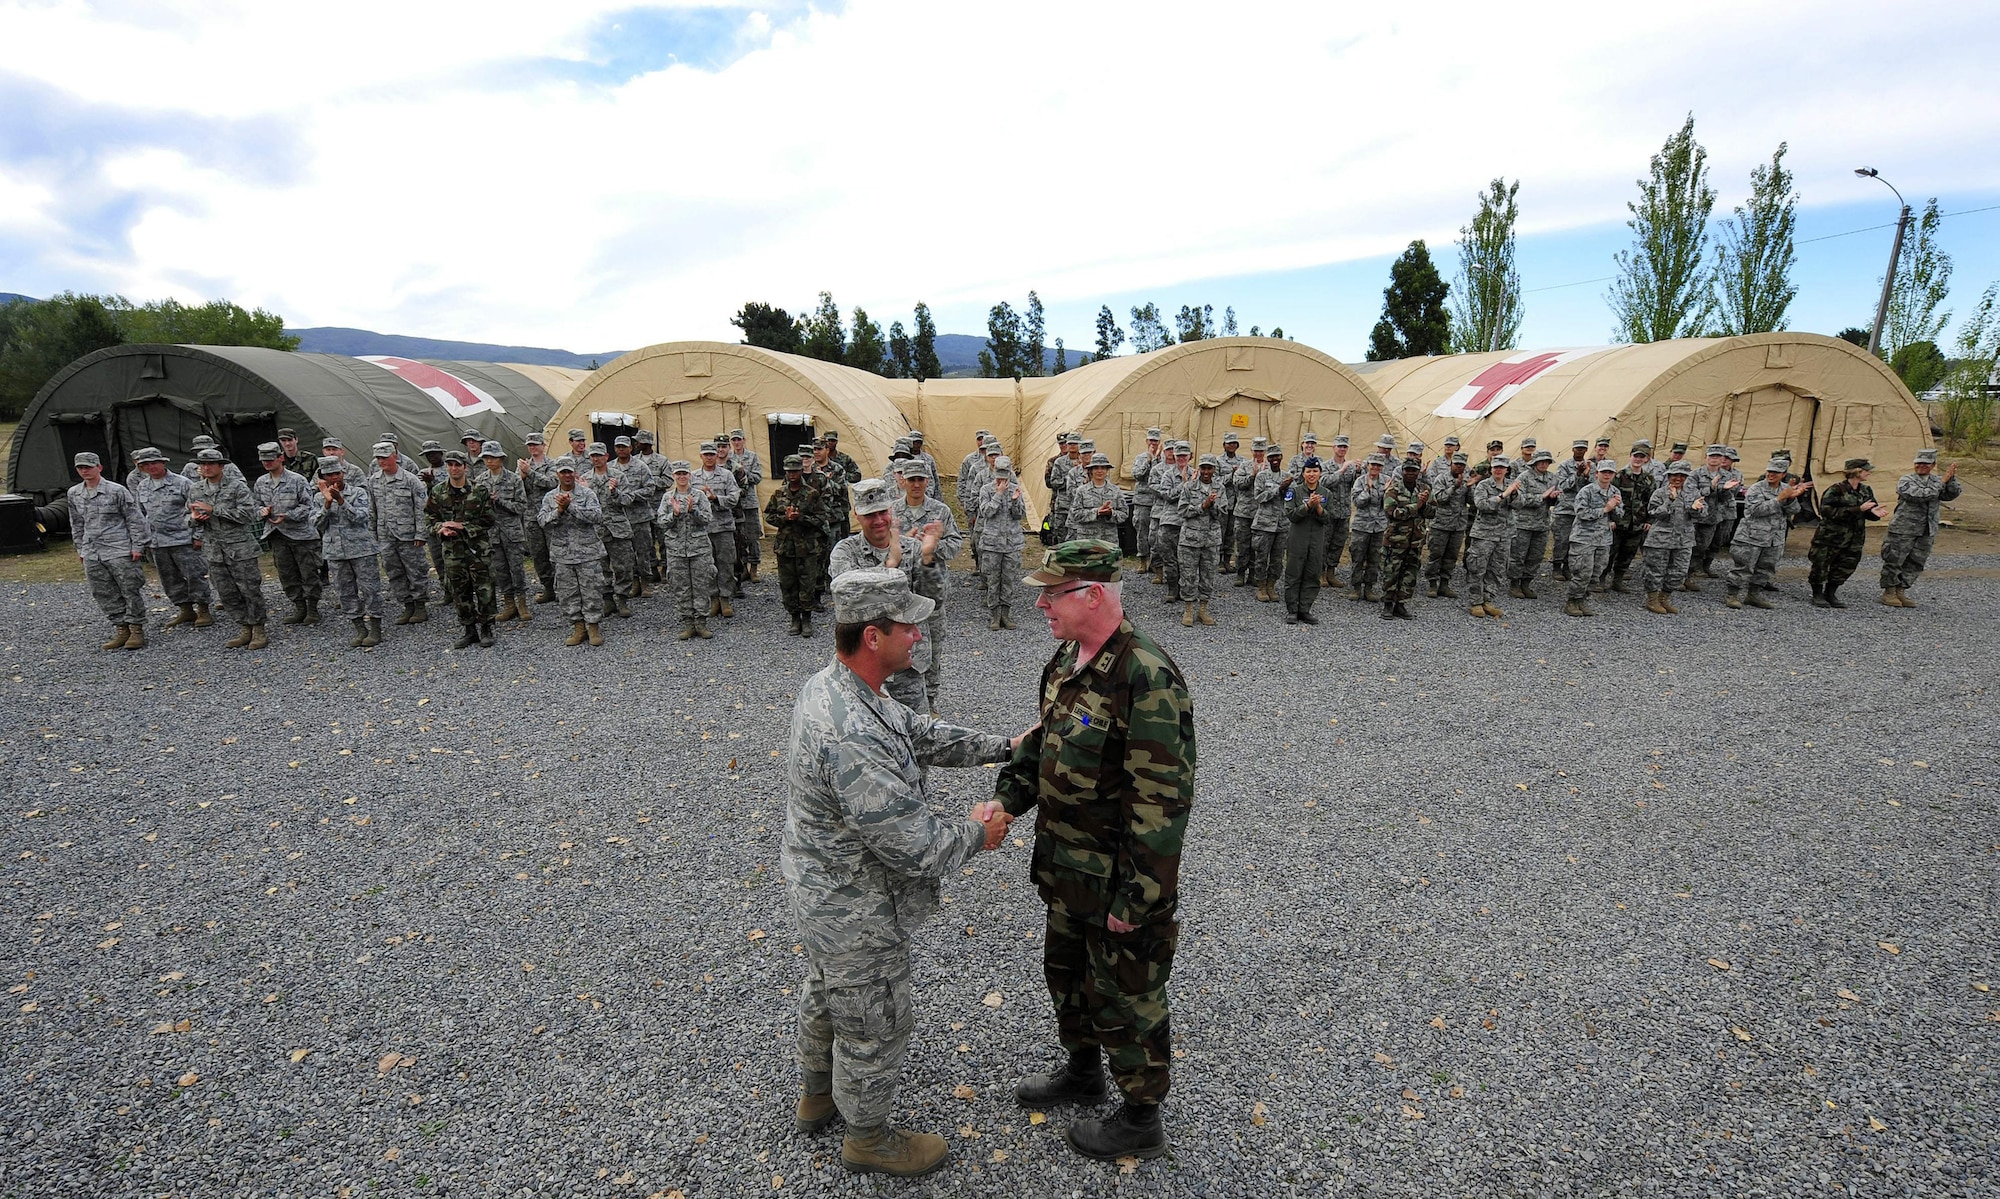 Col. David Garrison and Chilean army Lt. Col. (Dr.) Guillermo Uslar shake hands during the final hand-off of the expeditionary hospital March 26, 2010, in Angol, Chile. Members of the Air Force Expeditionary Medical Support team completed a humanitarian mission to build a hospital and augment medical care for members of the Angol community. A team of Airmen built, staffed and equipped a field hospital to serve more than 110,000 people in the Angol region. During a ceremony March 24, U.S. government officials donated the hospital to the local Chilean medical community. (U.S. Air Force photo/Senior Airman Tiffany Trojca)